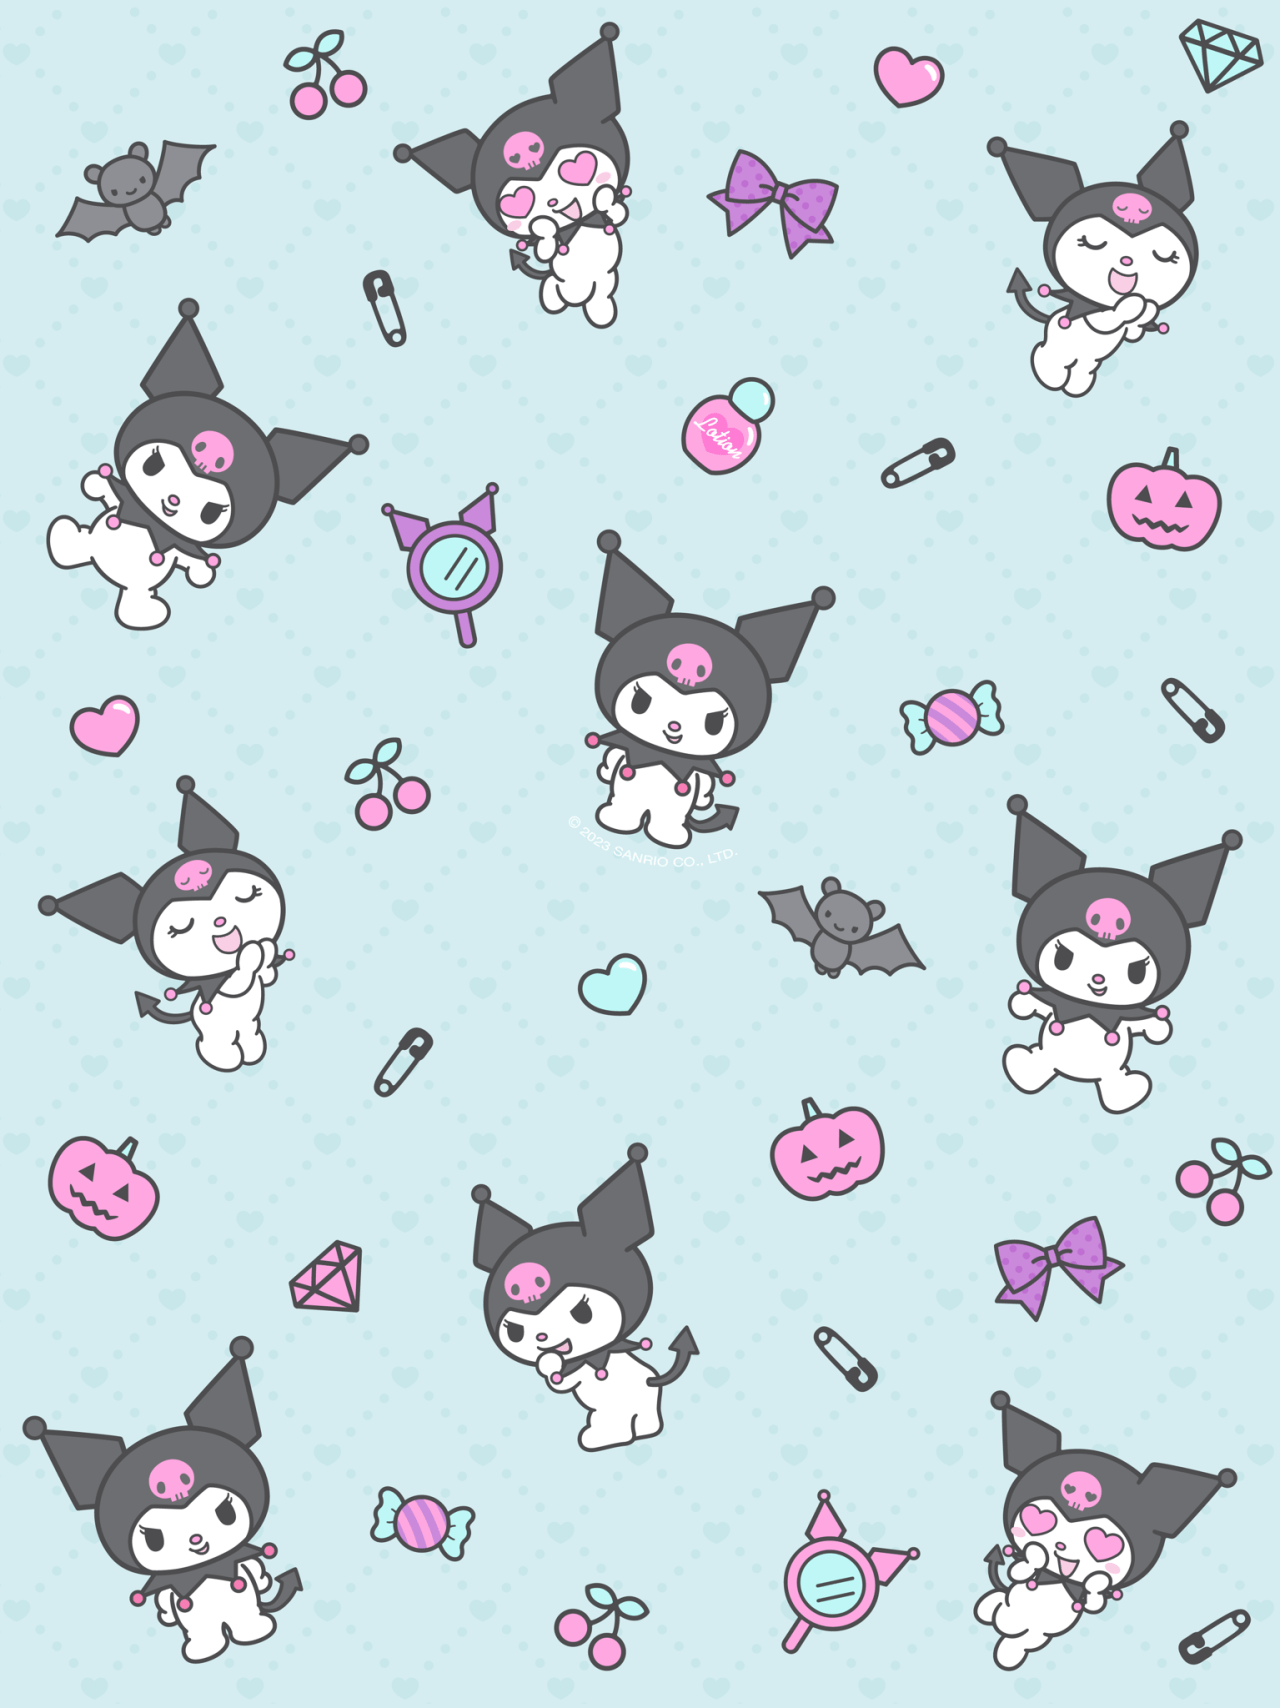 Kuromi Halloween wallpaper I made for my phone! - My Melody